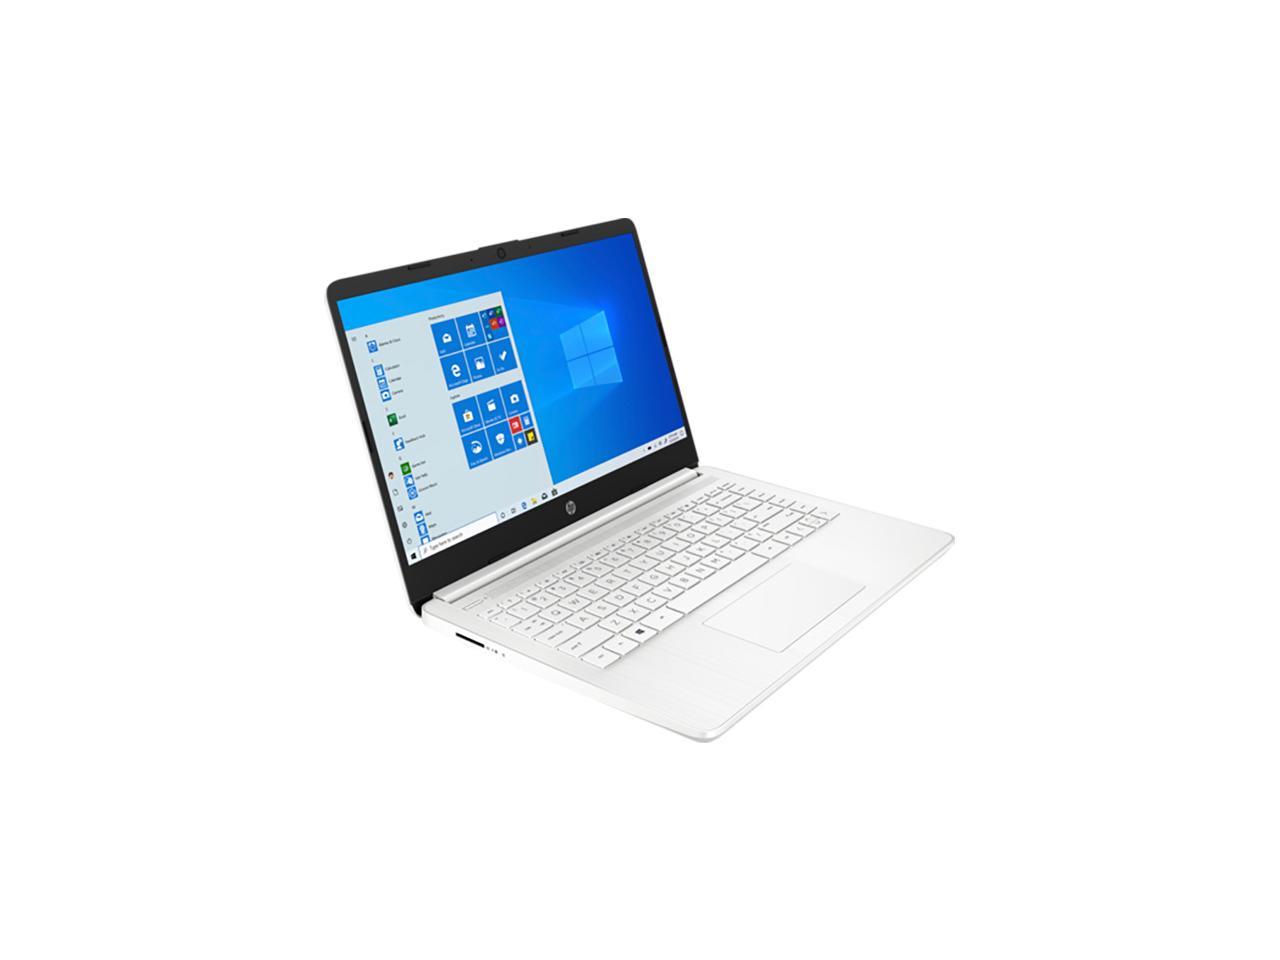 Hp 14Z Home And Business Laptop Snow White (Amd Amd 3020E 2-Core, 8Gb Ram, 256Gb Pcie Ssd, 14.0"